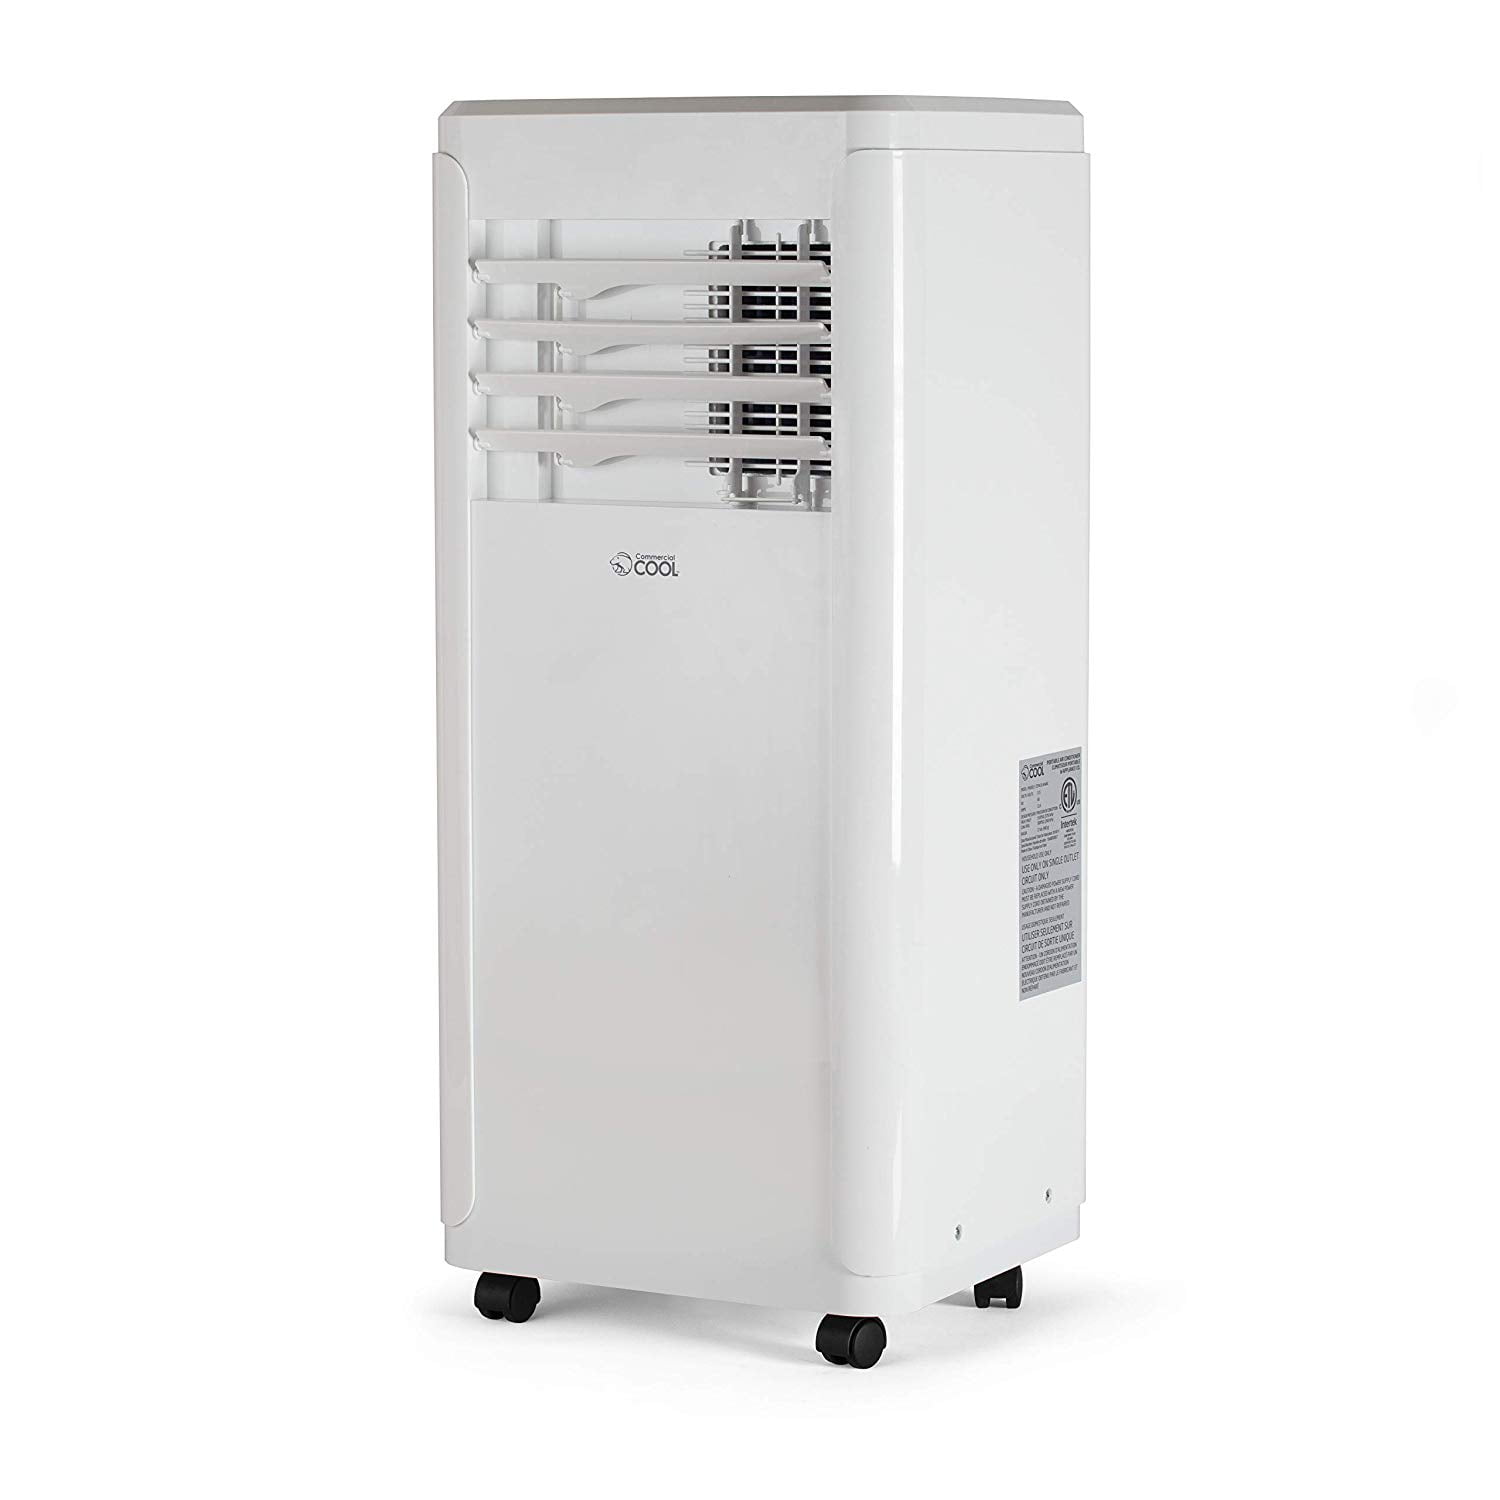 Commercial Cool 14,000 BTU Portable Air Conditioner with Heat + Remote Control, White Walmart